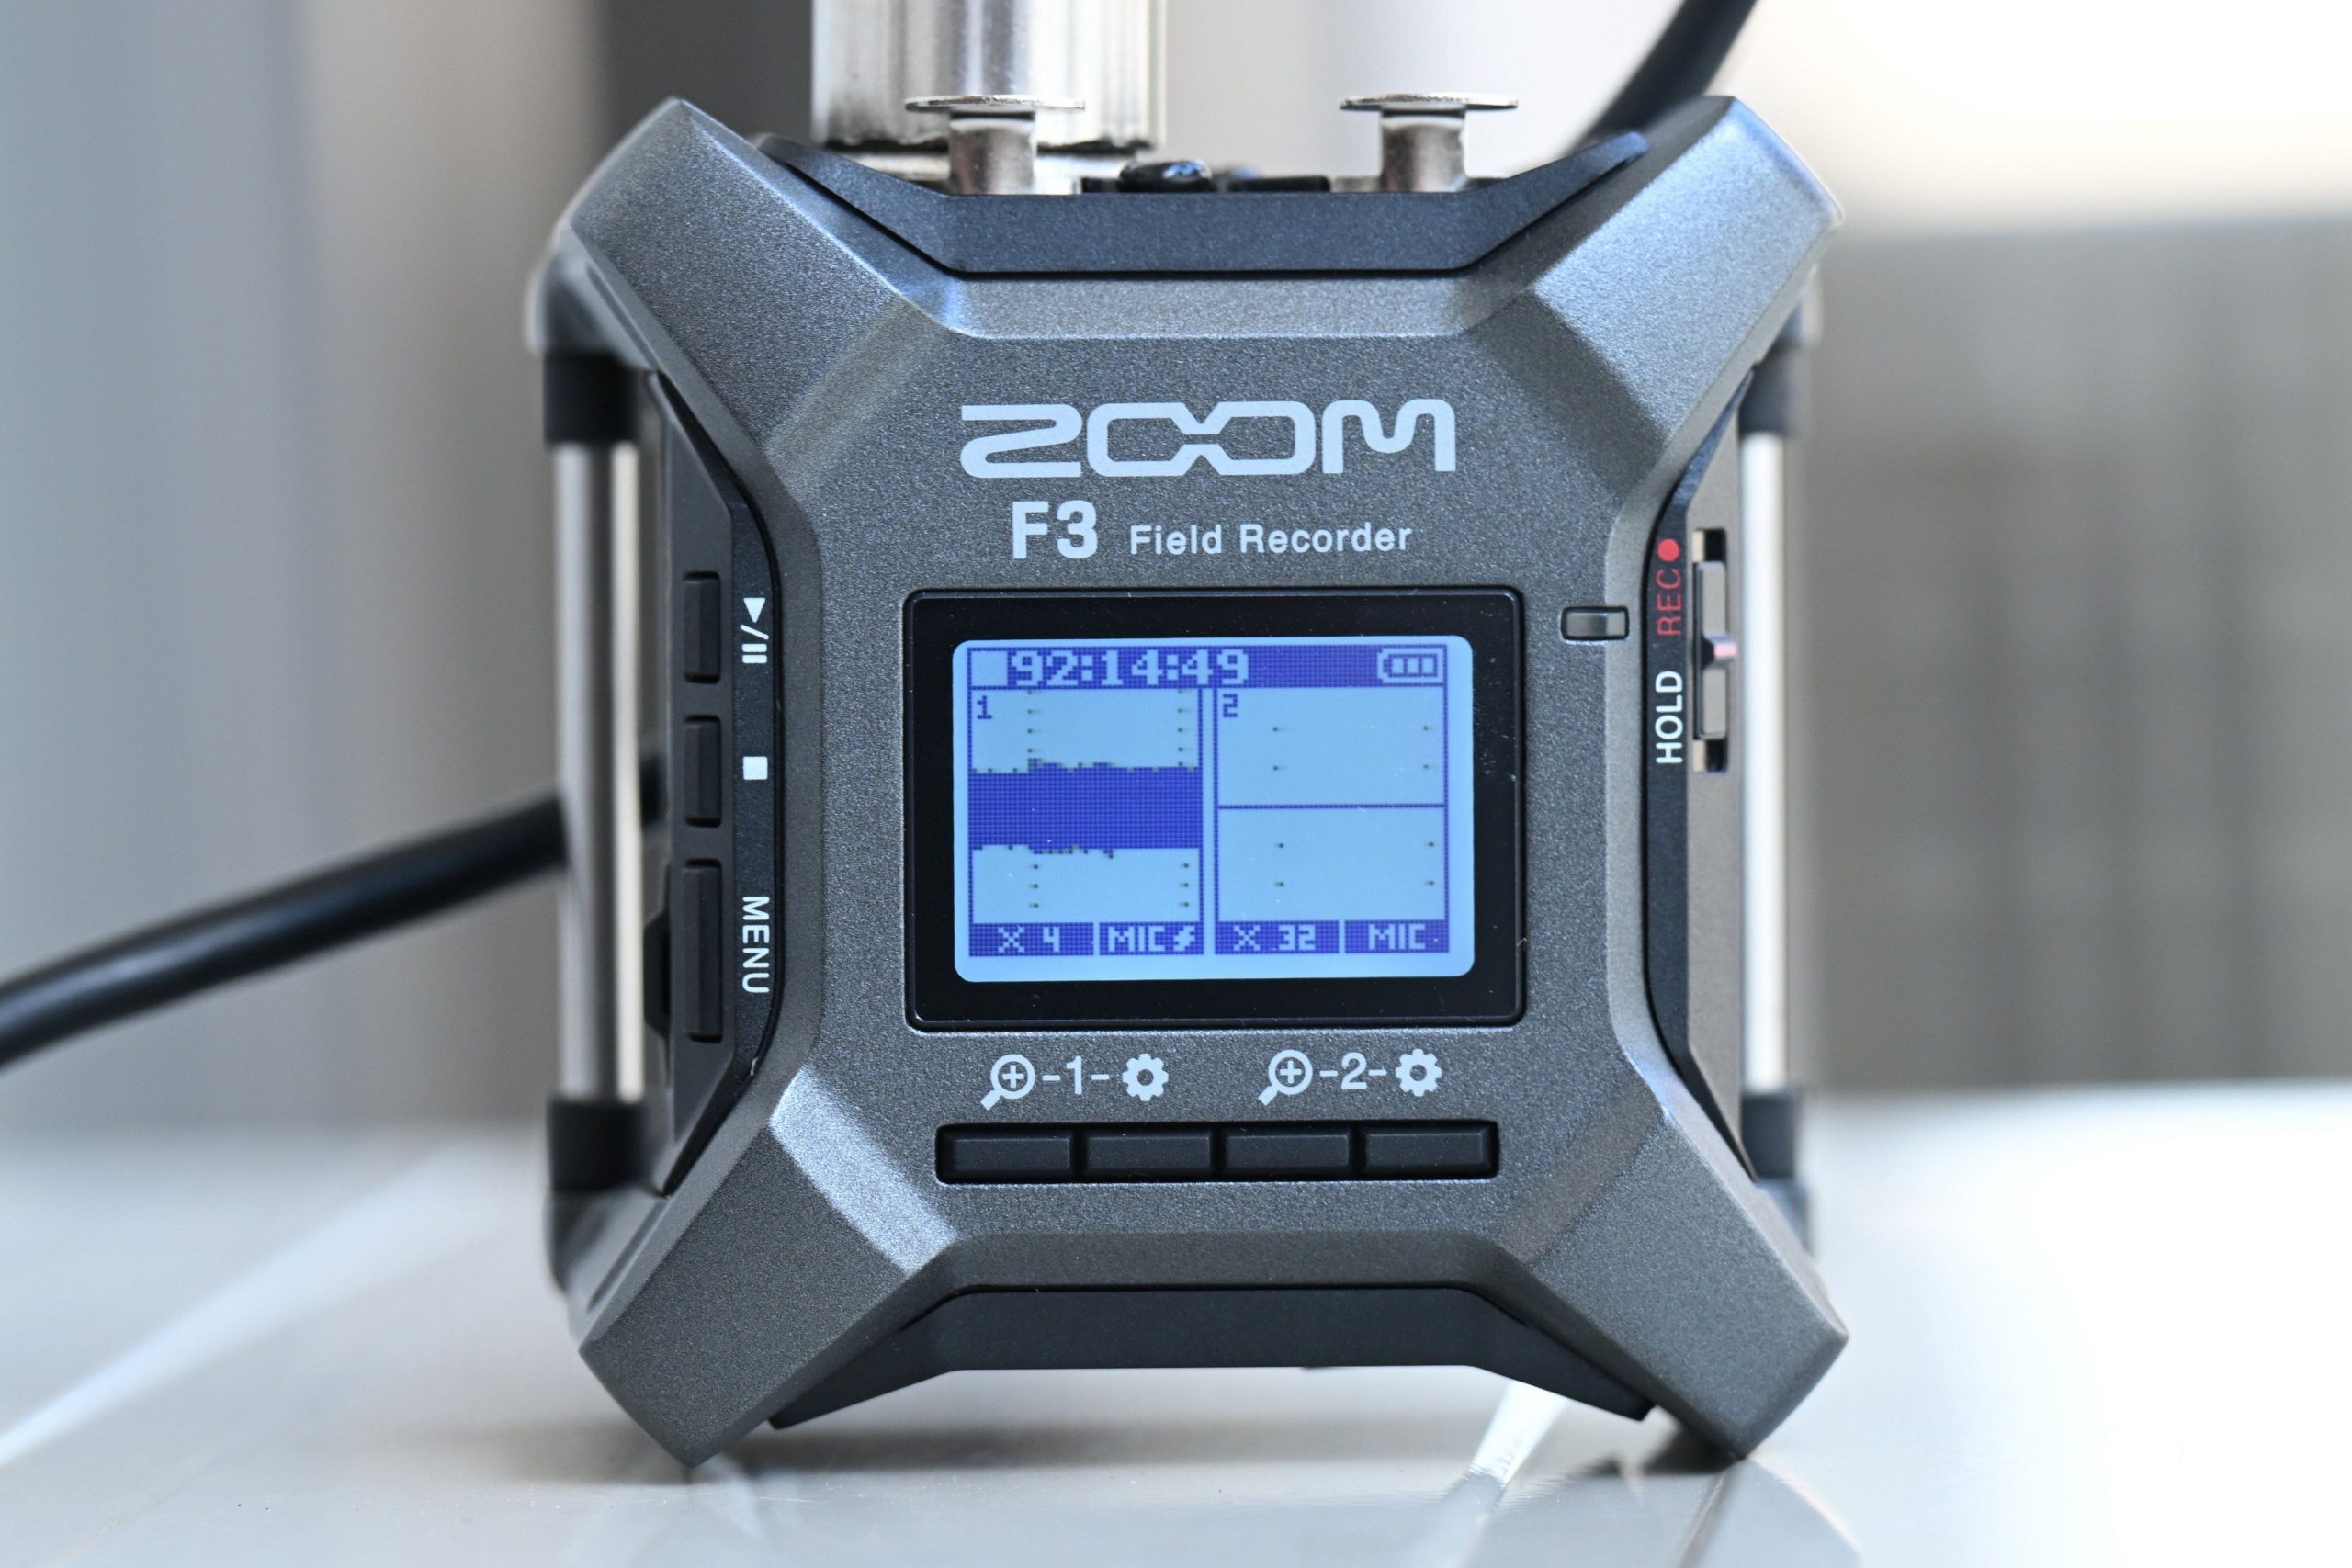 4 Handy Tips for Zoom H1 Recorder For Best Recording